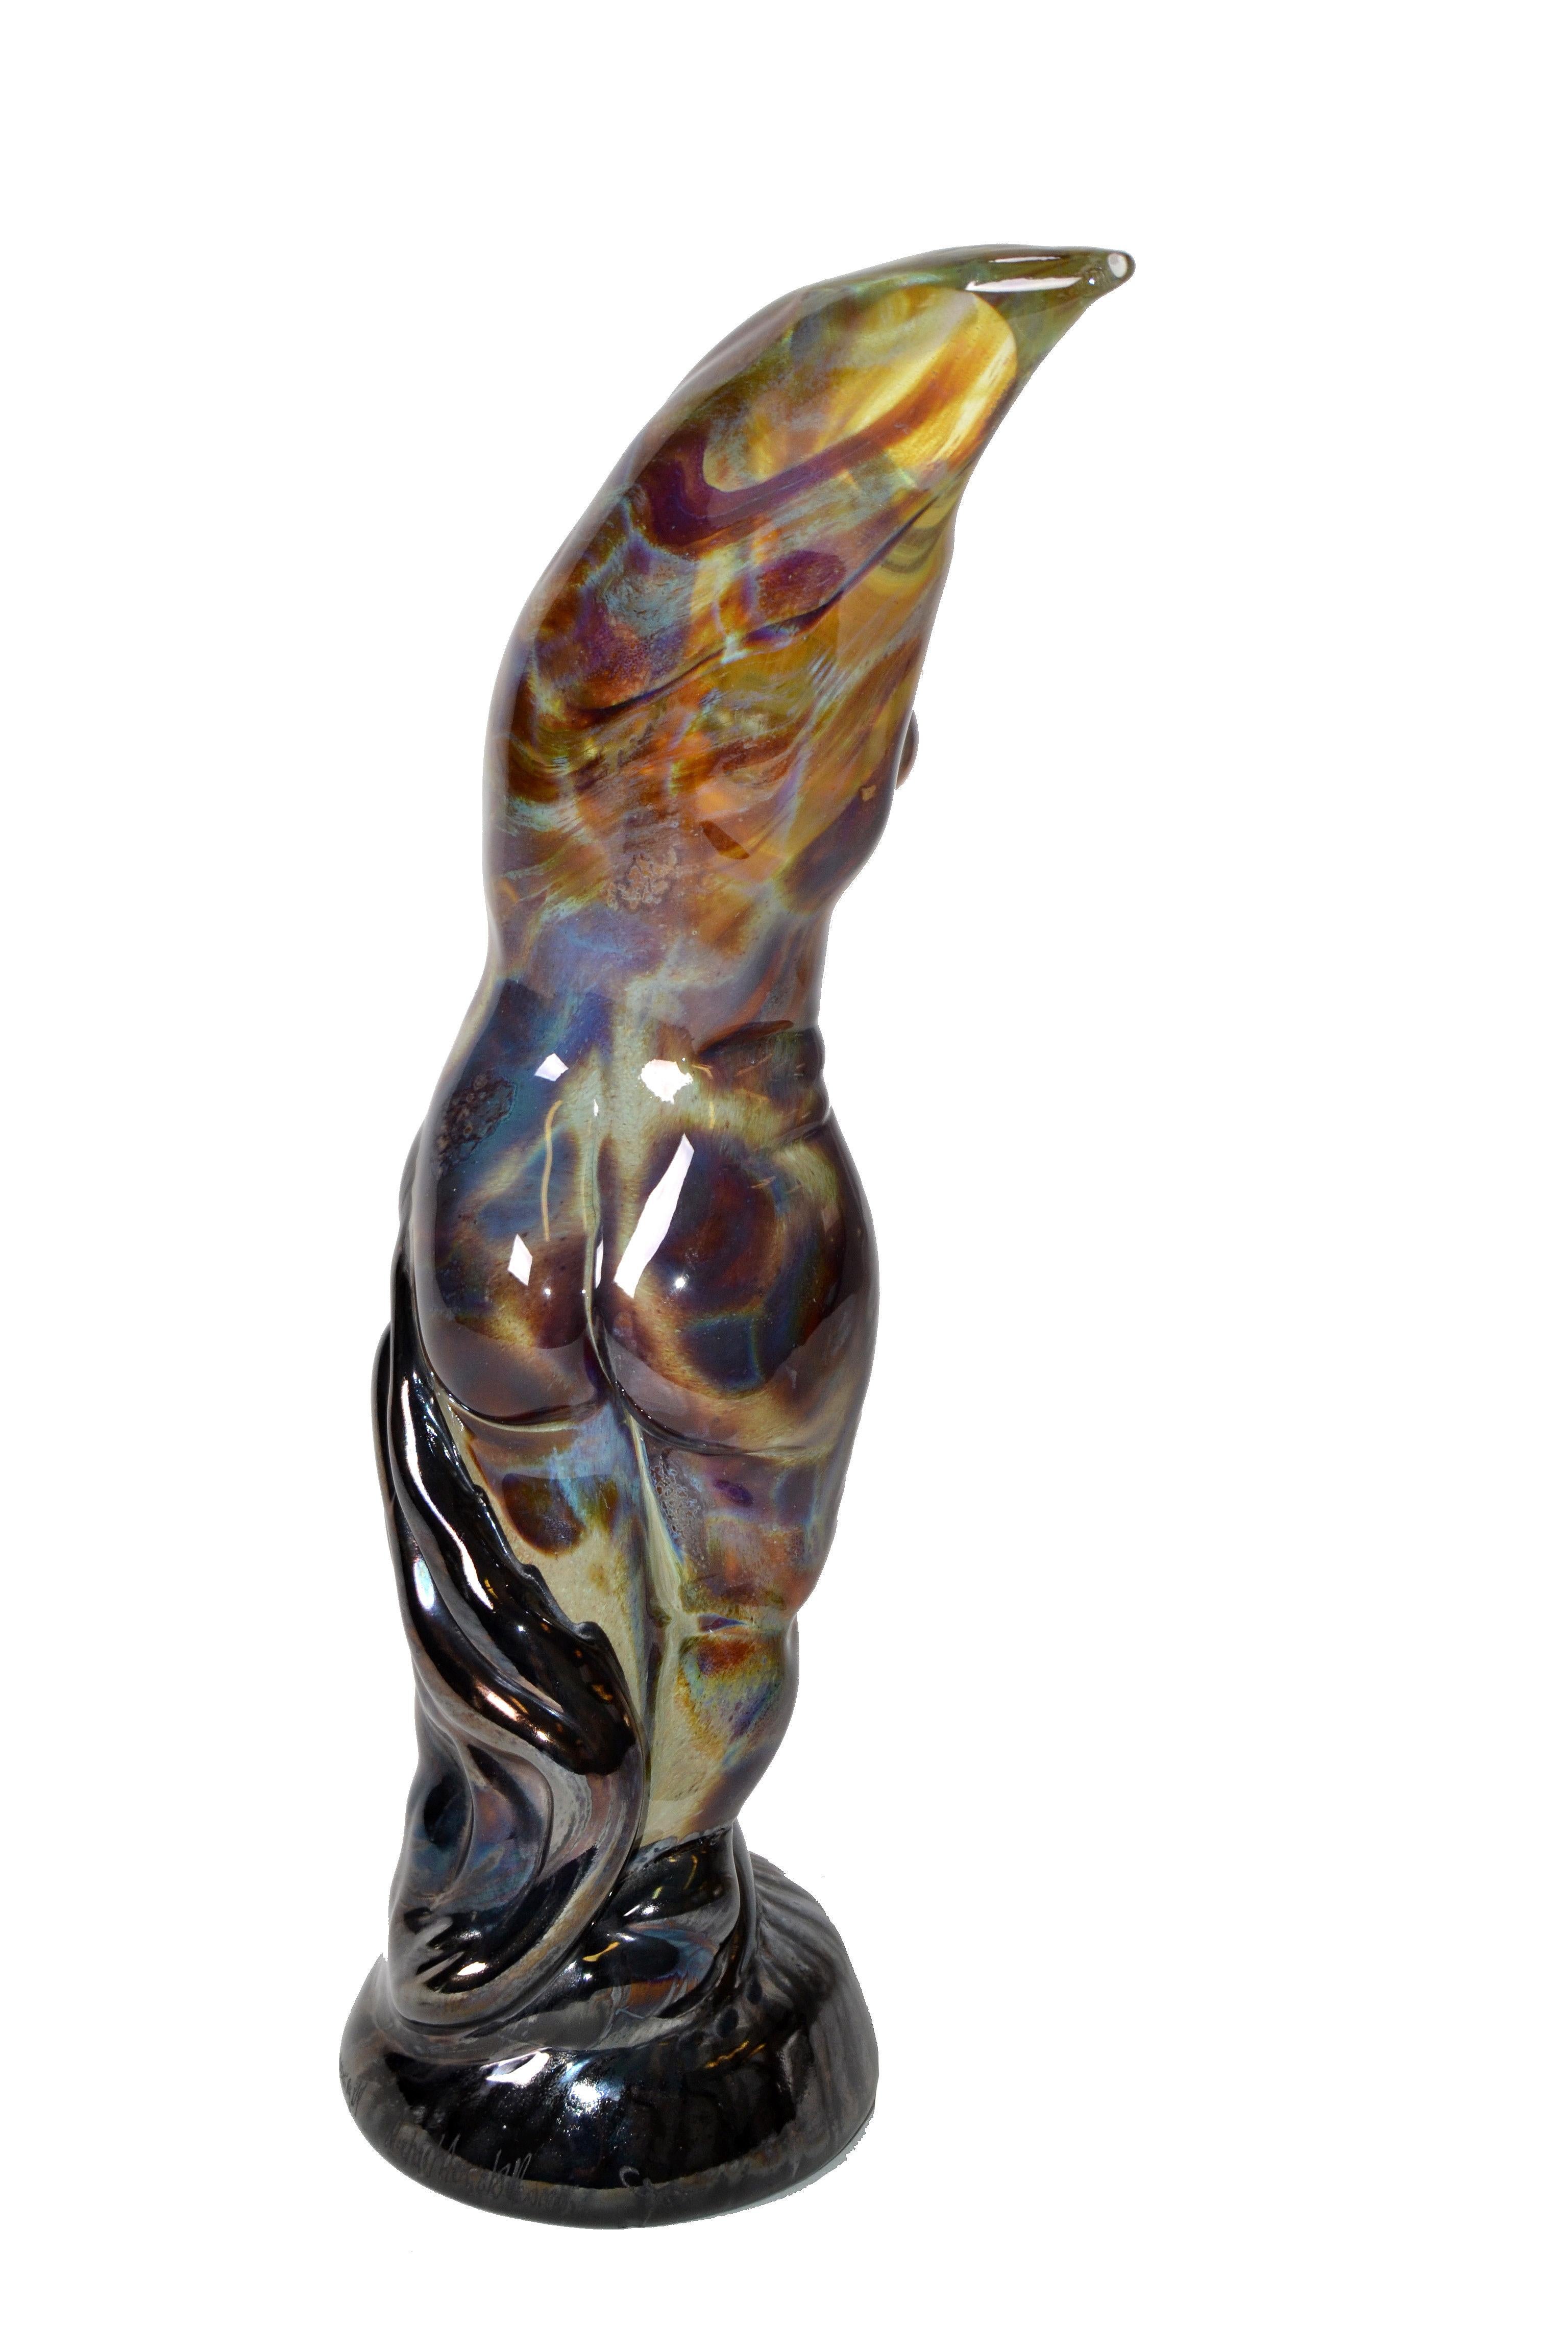 Hand-Crafted Modern Art Glass Sculpture Nude Woman Titled The Way She Moves Signed Michael For Sale